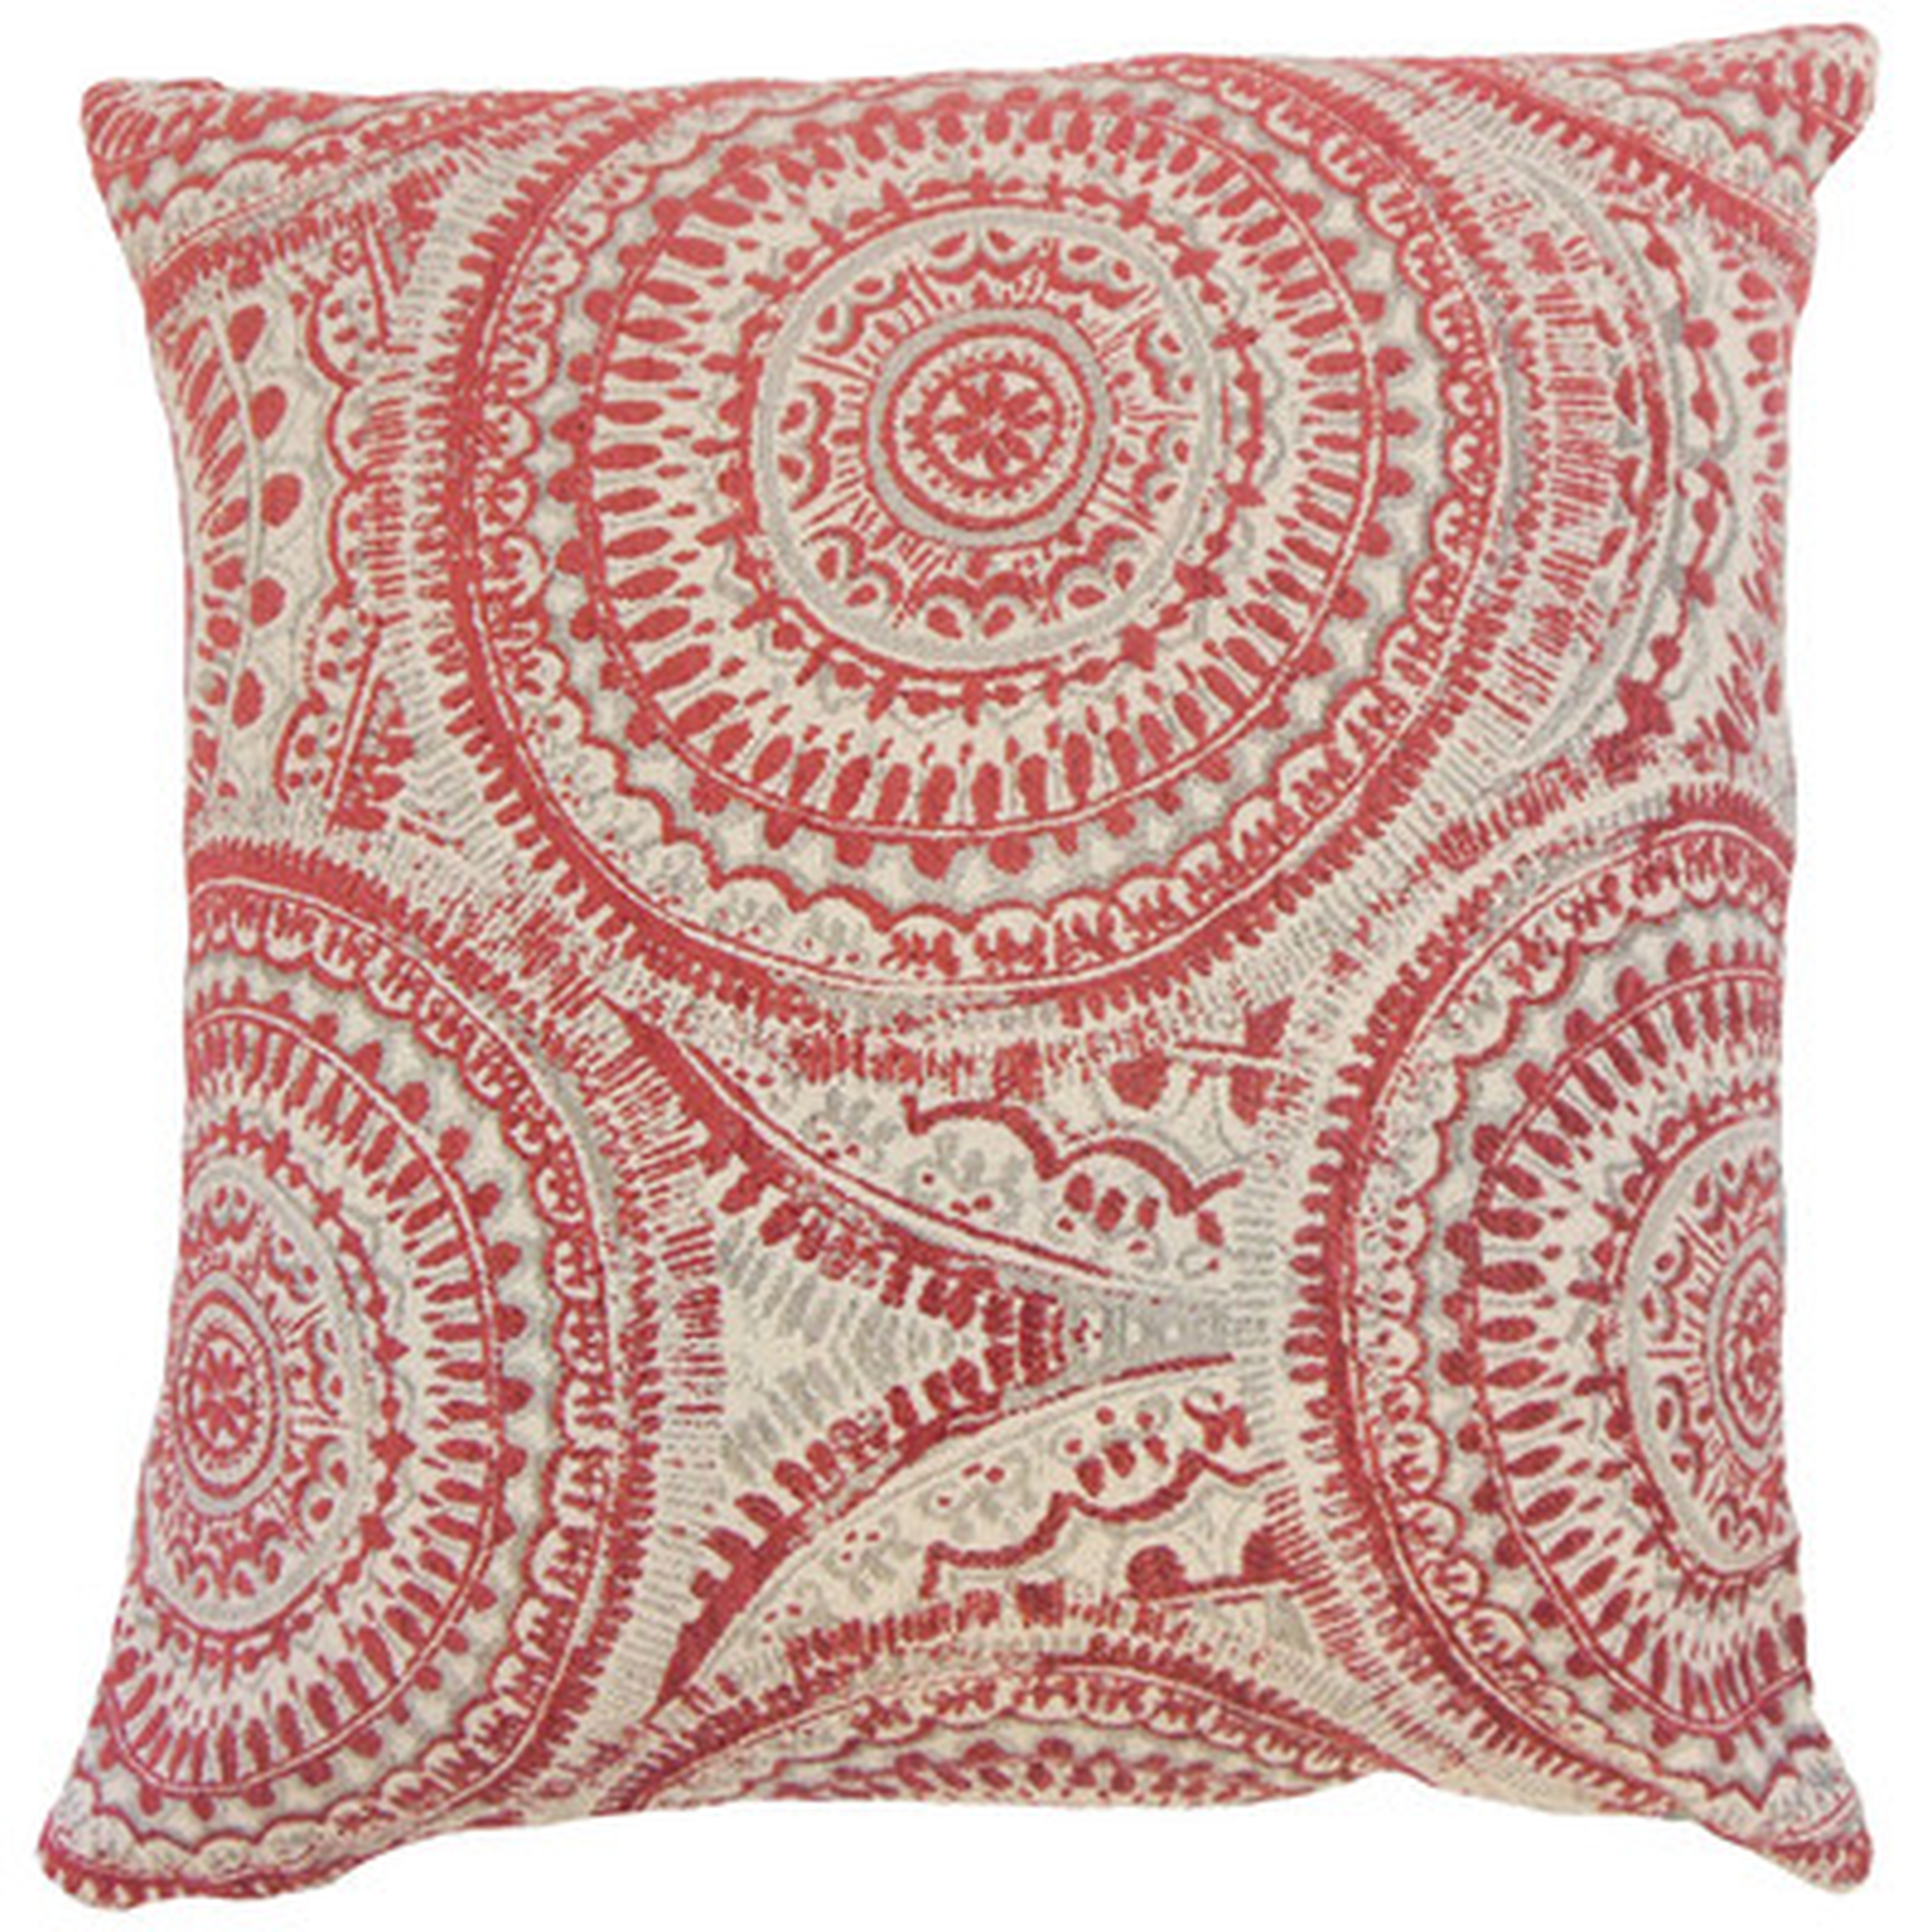 Chione Graphic Throw Pillow Cover - Wayfair